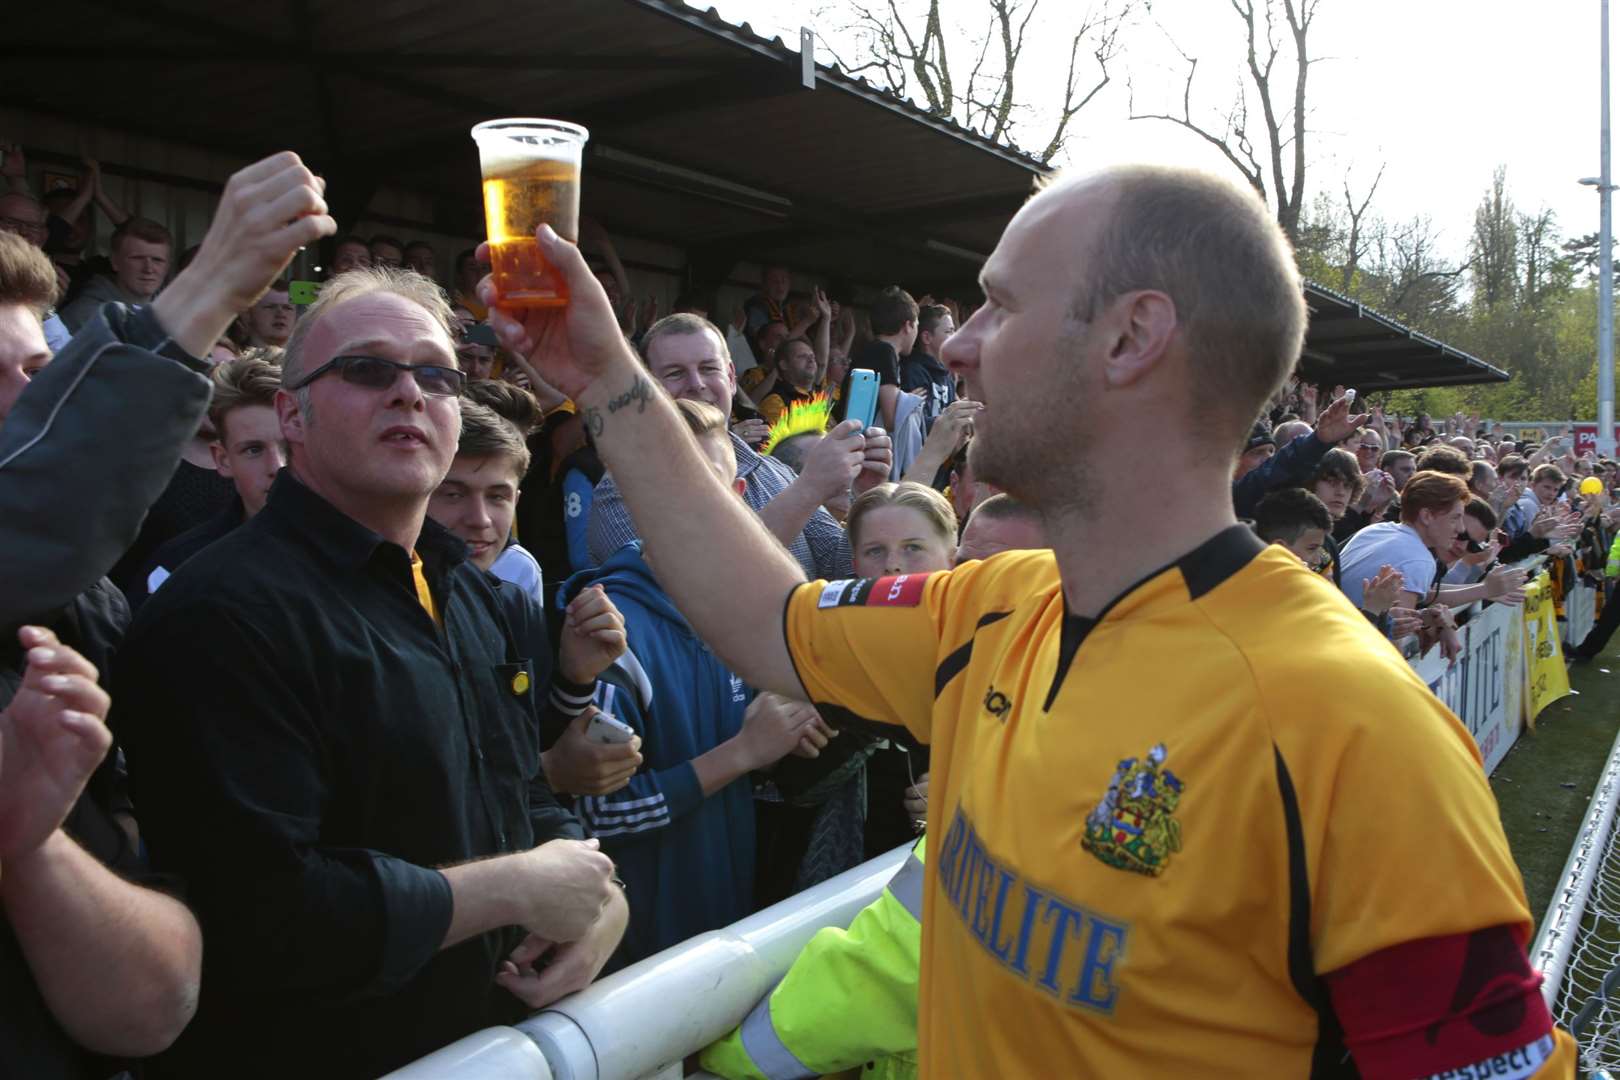 Steve Watt raises a pint to Maidstone United fans in 2015, after they finish as champions of the Isthmian League - but more promotions could stop the beers flowing at the club.